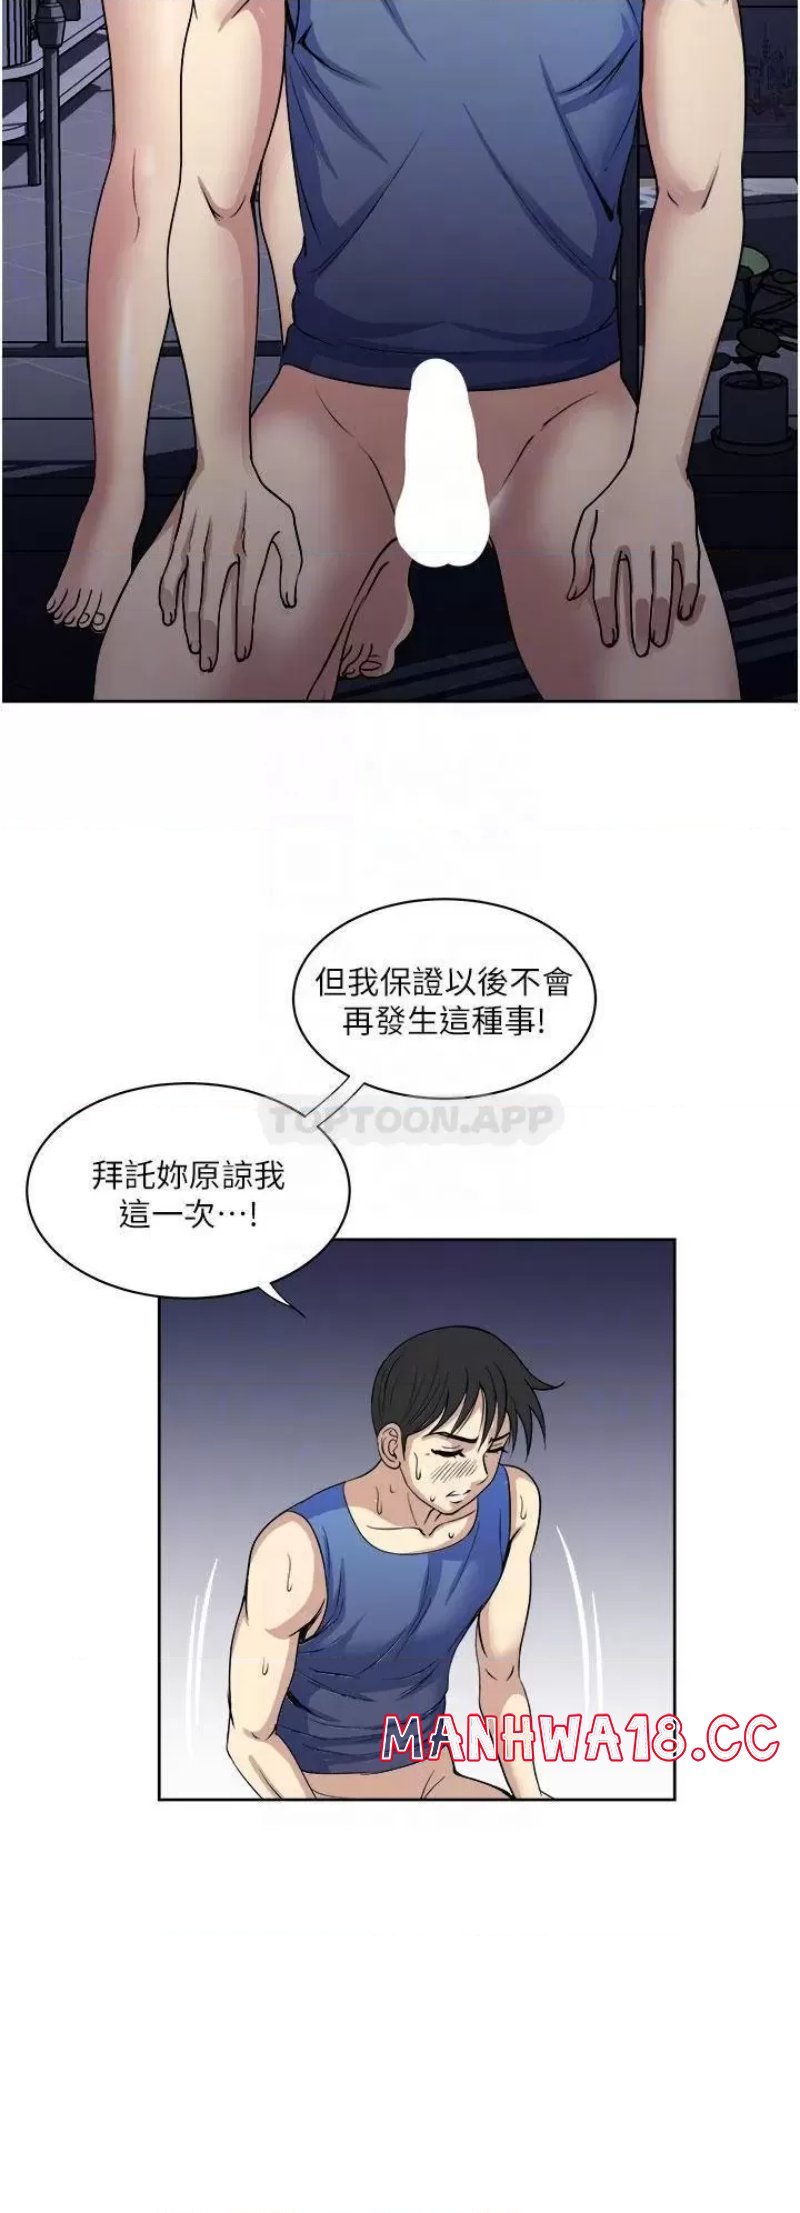 just-once-raw-chap-21-17